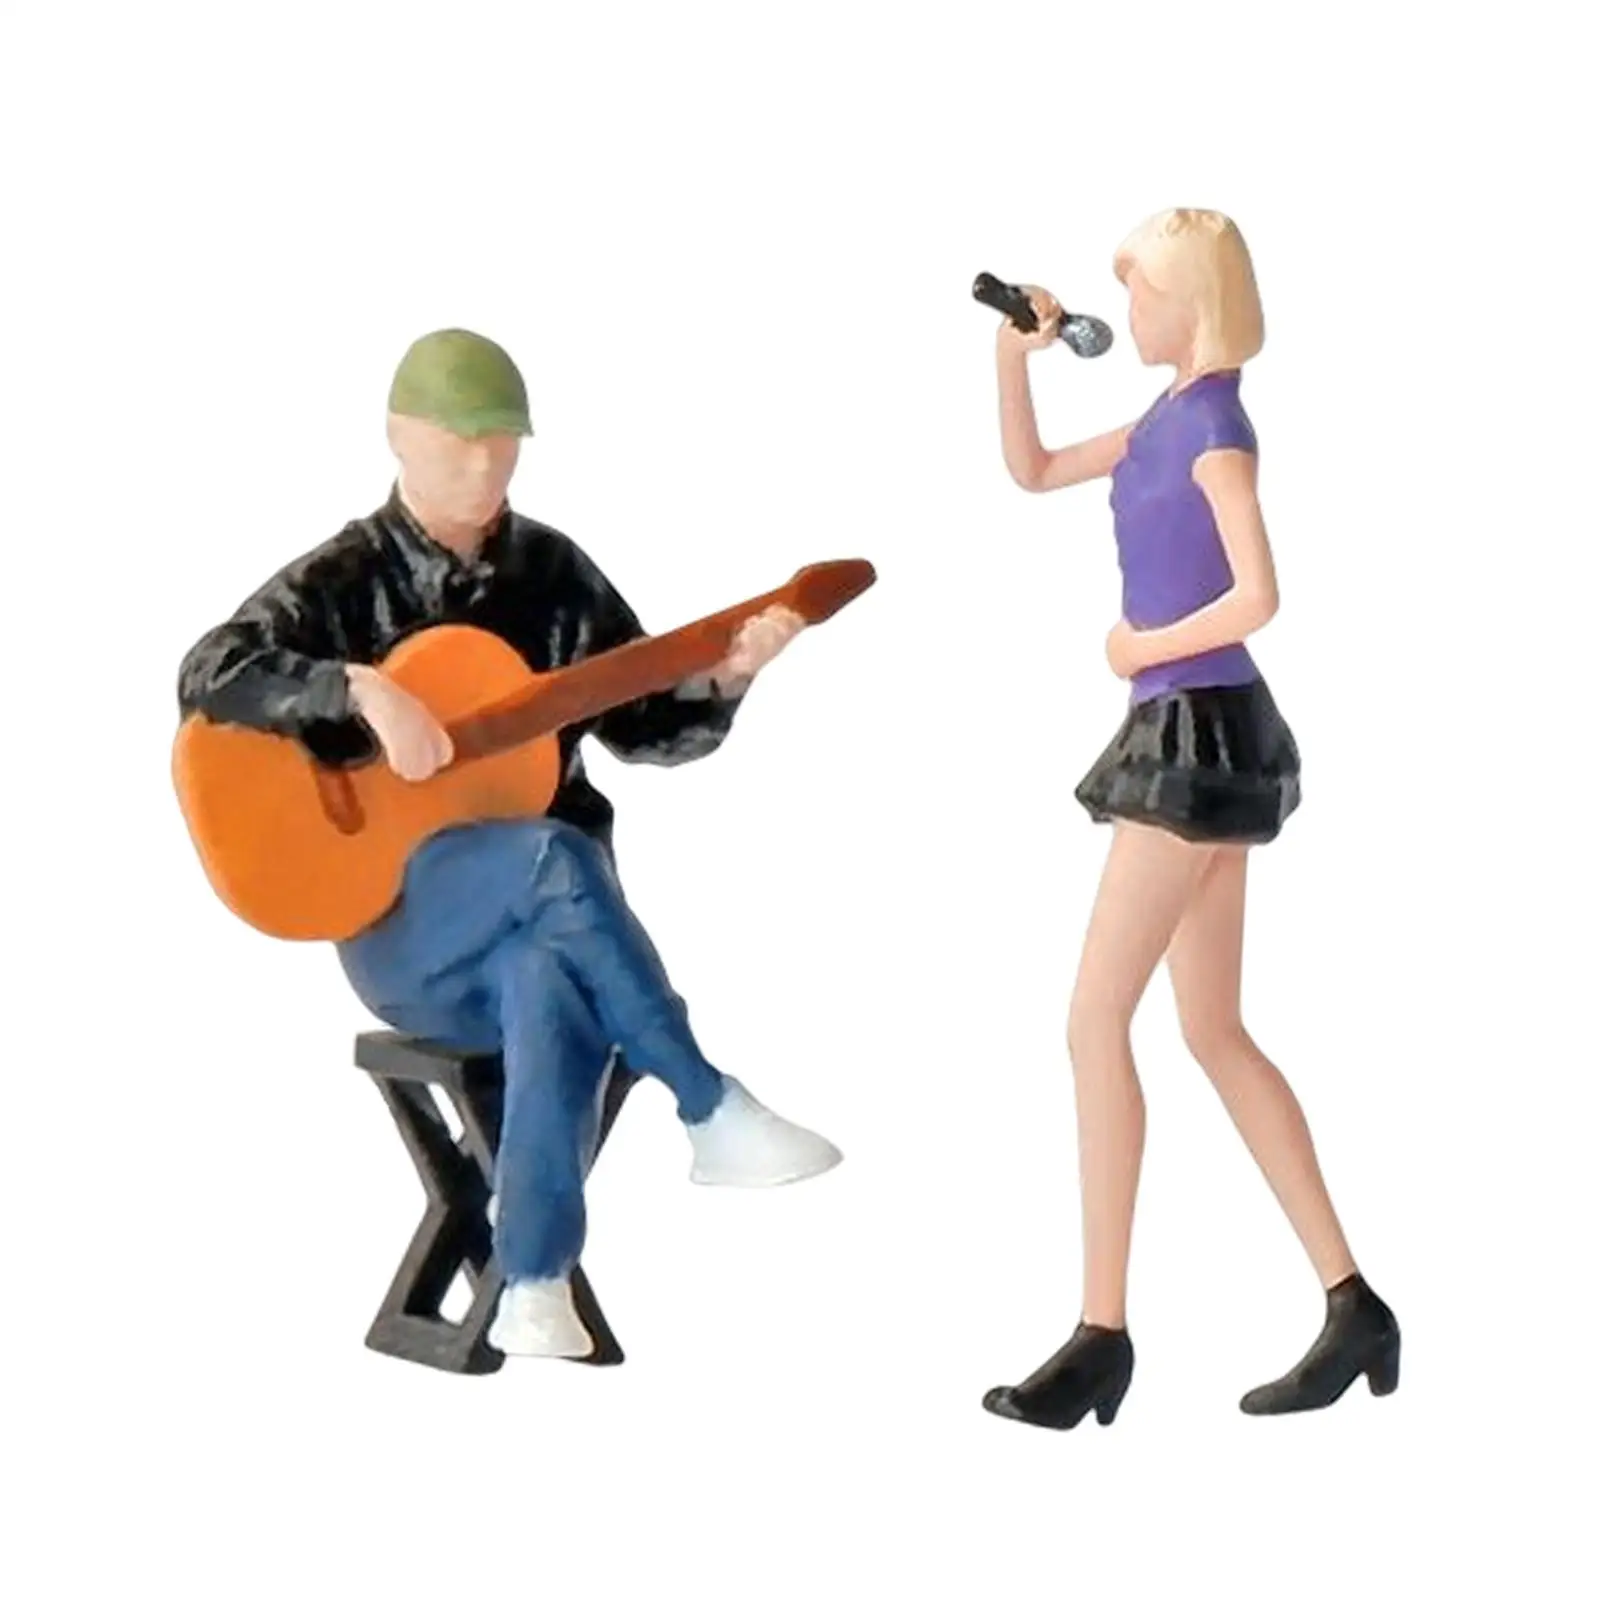 1:64 Model Figures Resin Collectibles Sand Table Ornament Street Singer Model Hand Painted for DIY Scene Decoration Accessories